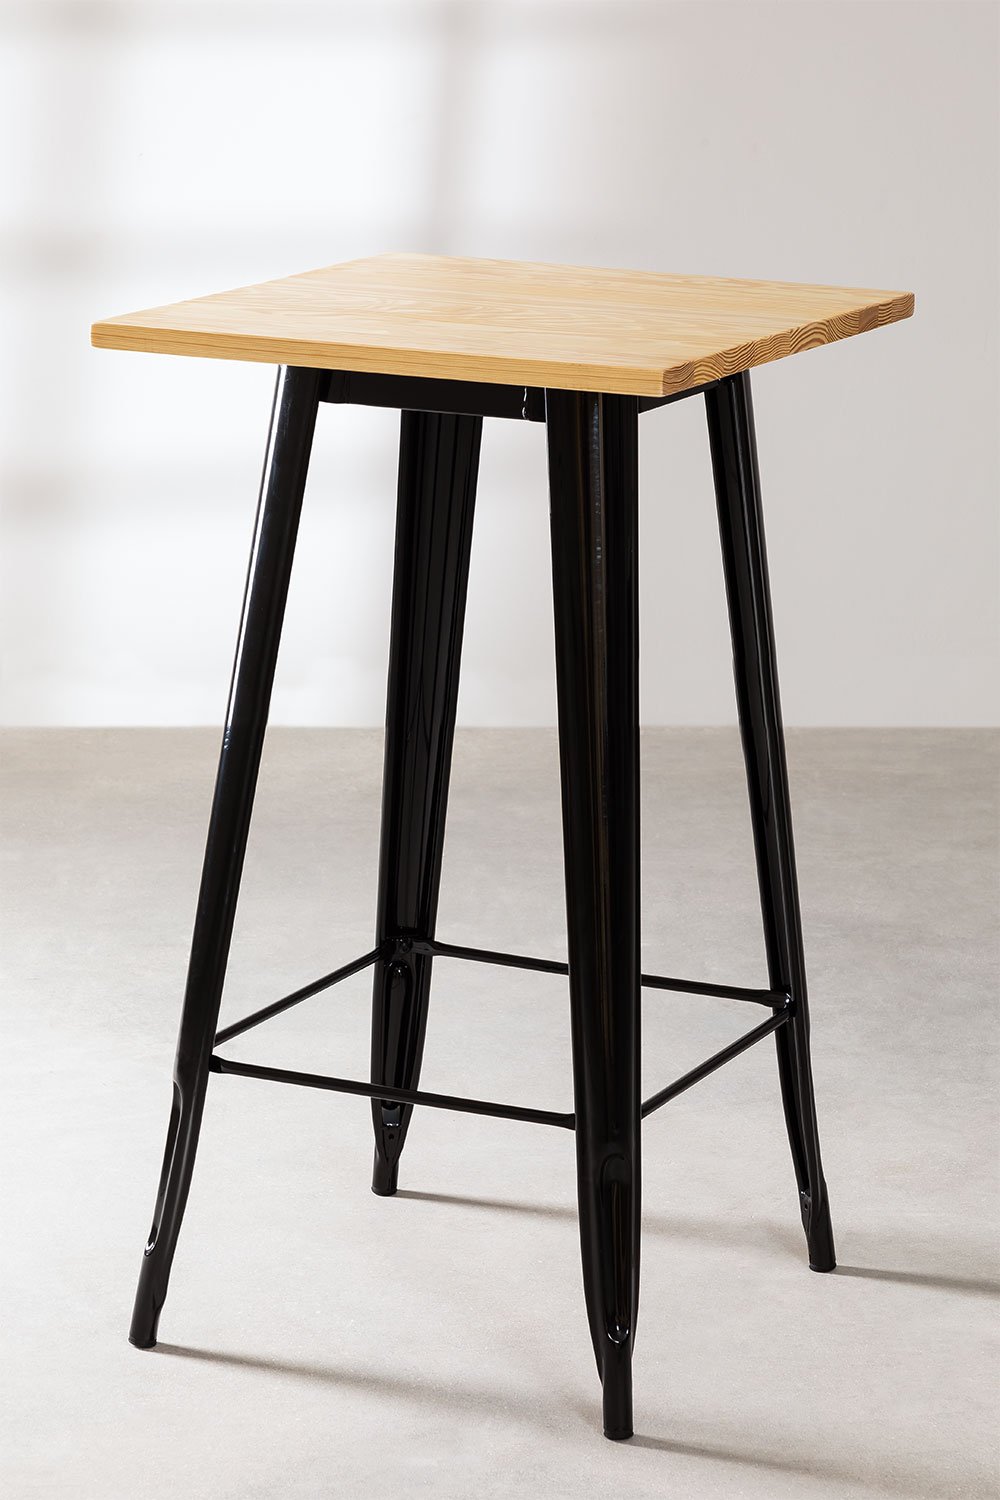 Wood & Steel Square High Table  (60 x 60 cm) LIX, gallery image 1